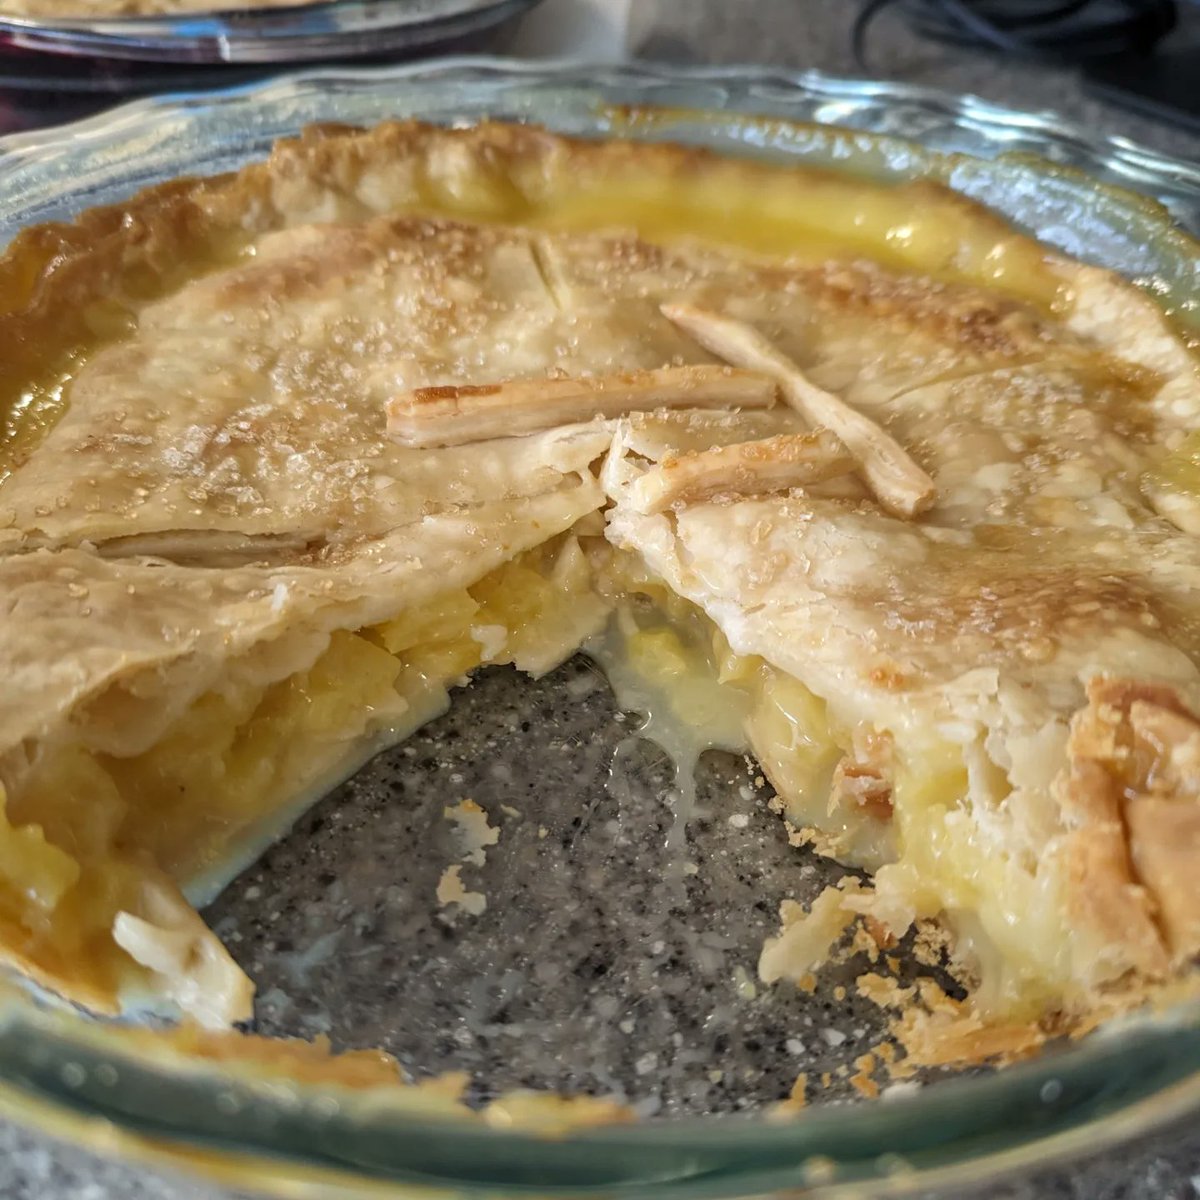 Happy Pi(e) Day! This year for #GLPBO24 I made a 1924 fresh pineapple pie from cookbook author Ida Bailey Allen. I had to cheat on the crust due to time constraints, but 8/10, will make again. #pieday